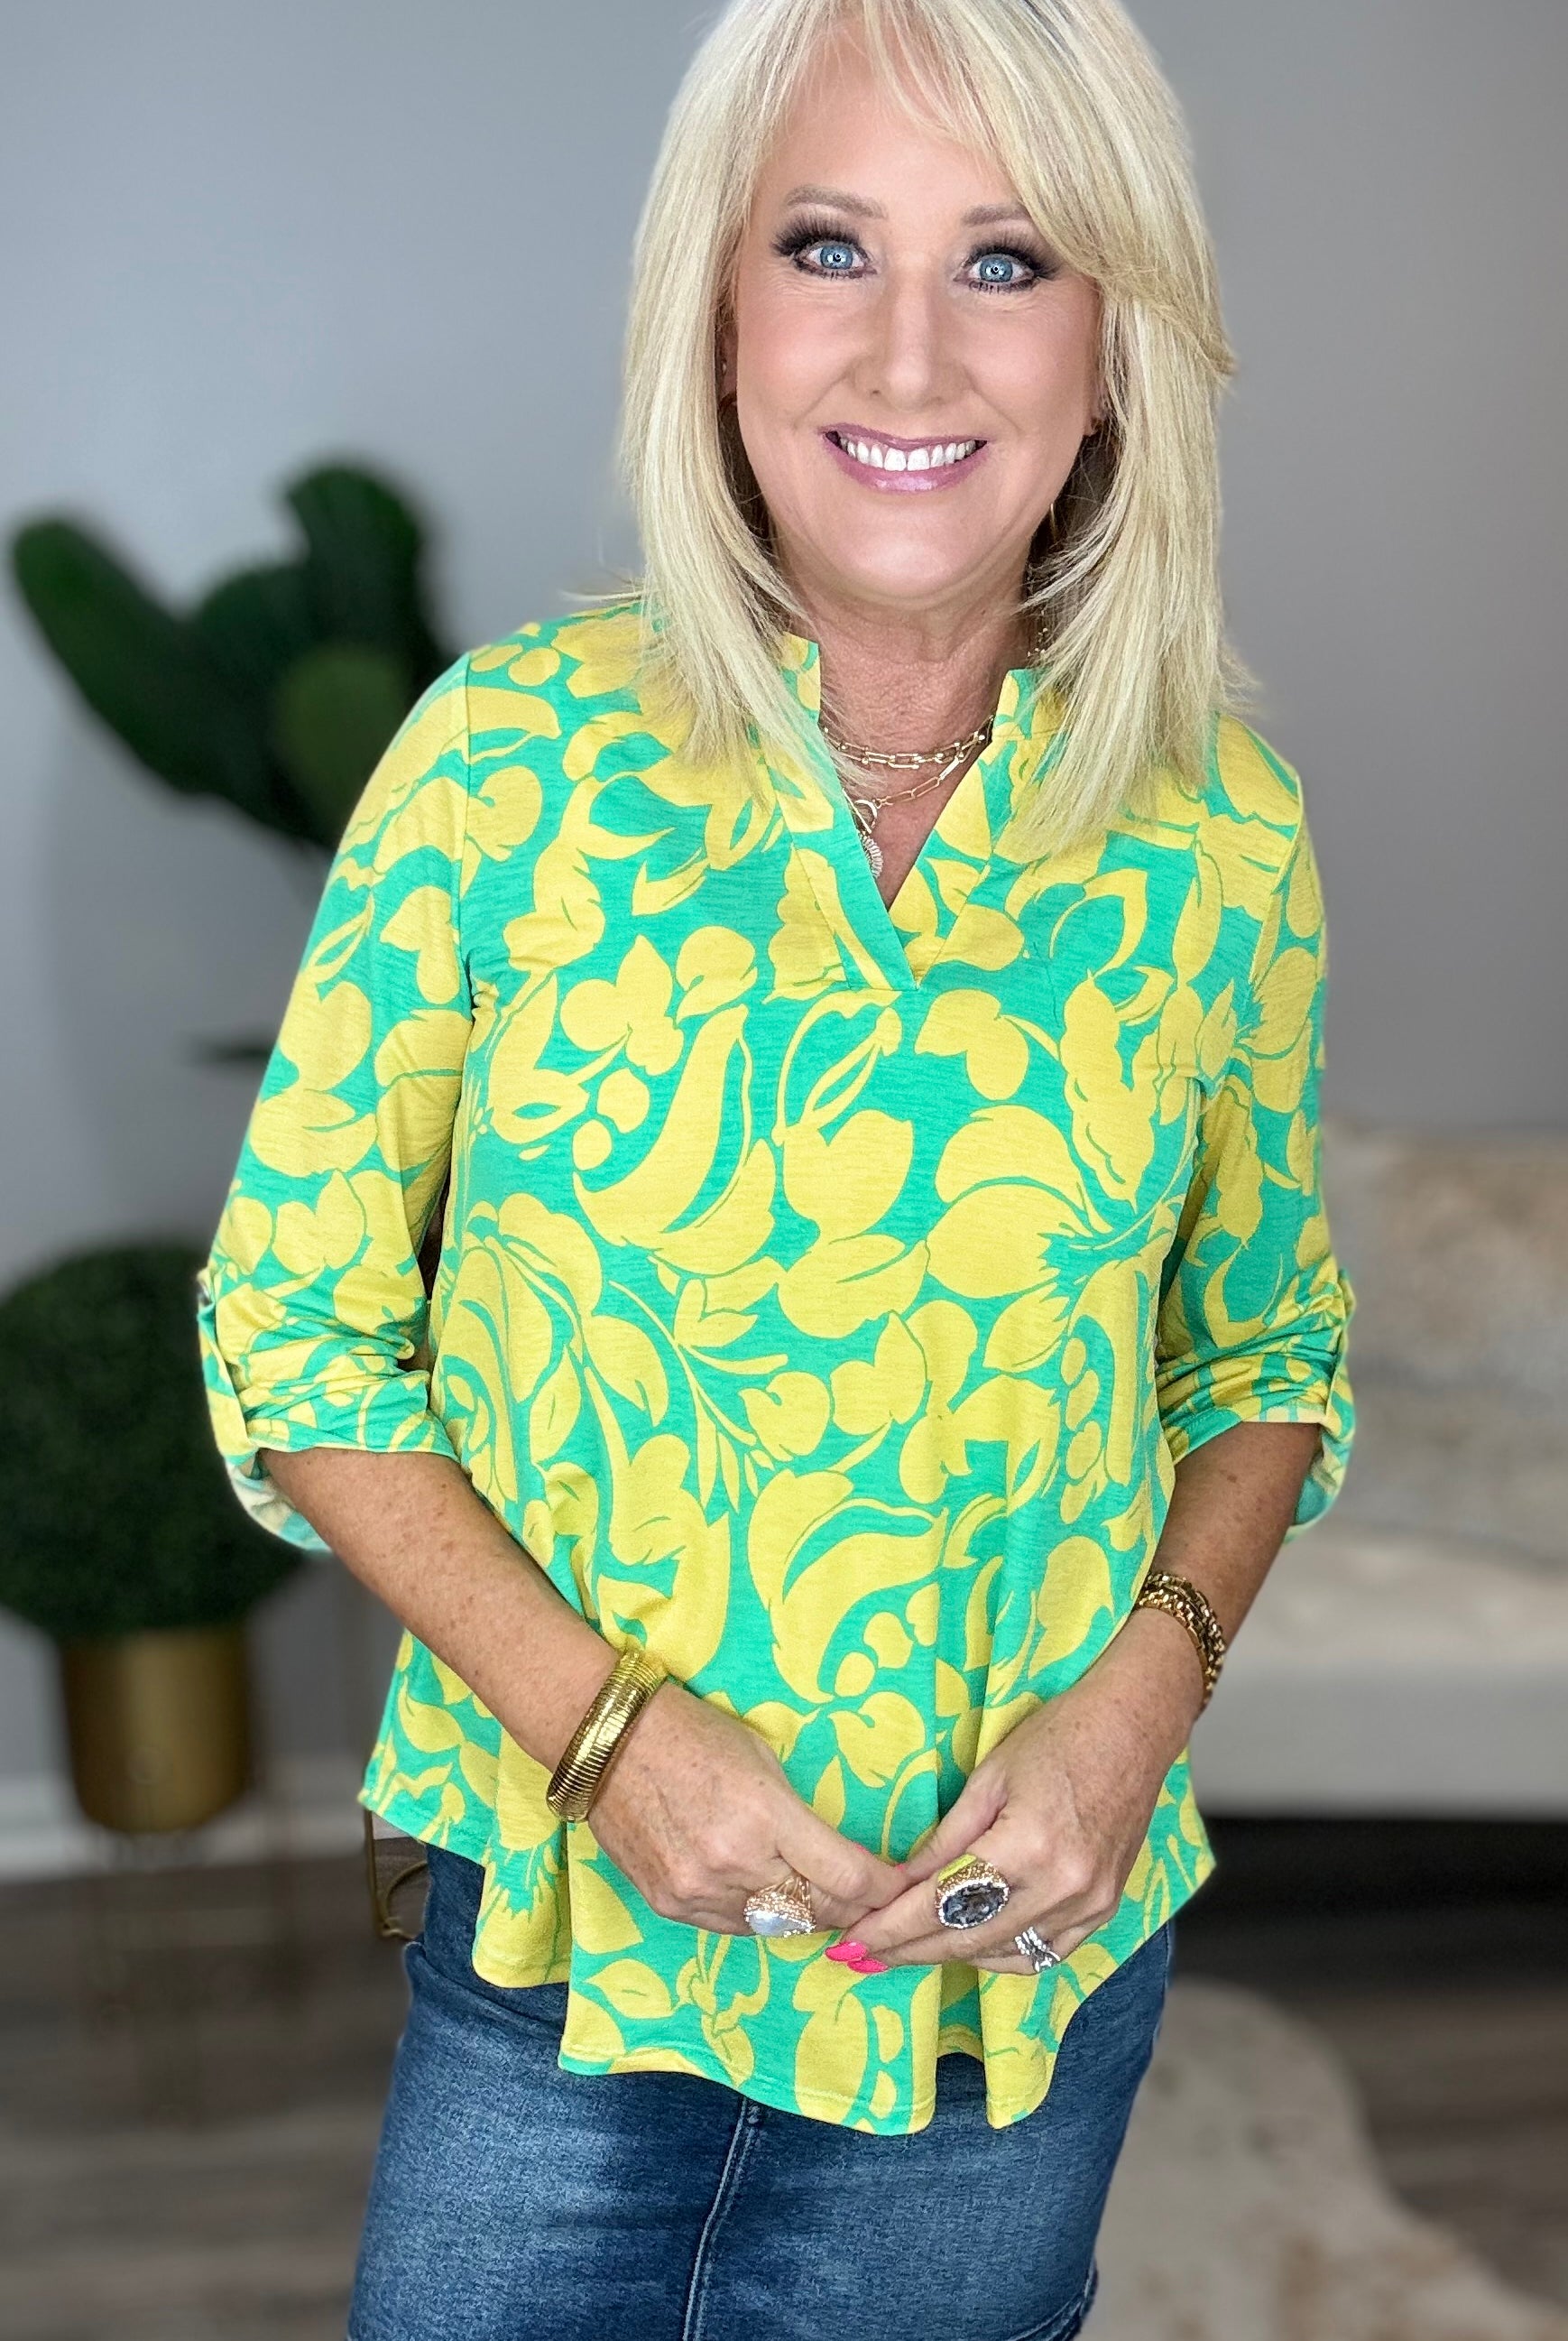 Lizzy Top in Kelly Green and Yellow Floral-Short Sleeves-Ave Shops-Urban Threadz Boutique, Women's Fashion Boutique in Saugatuck, MI